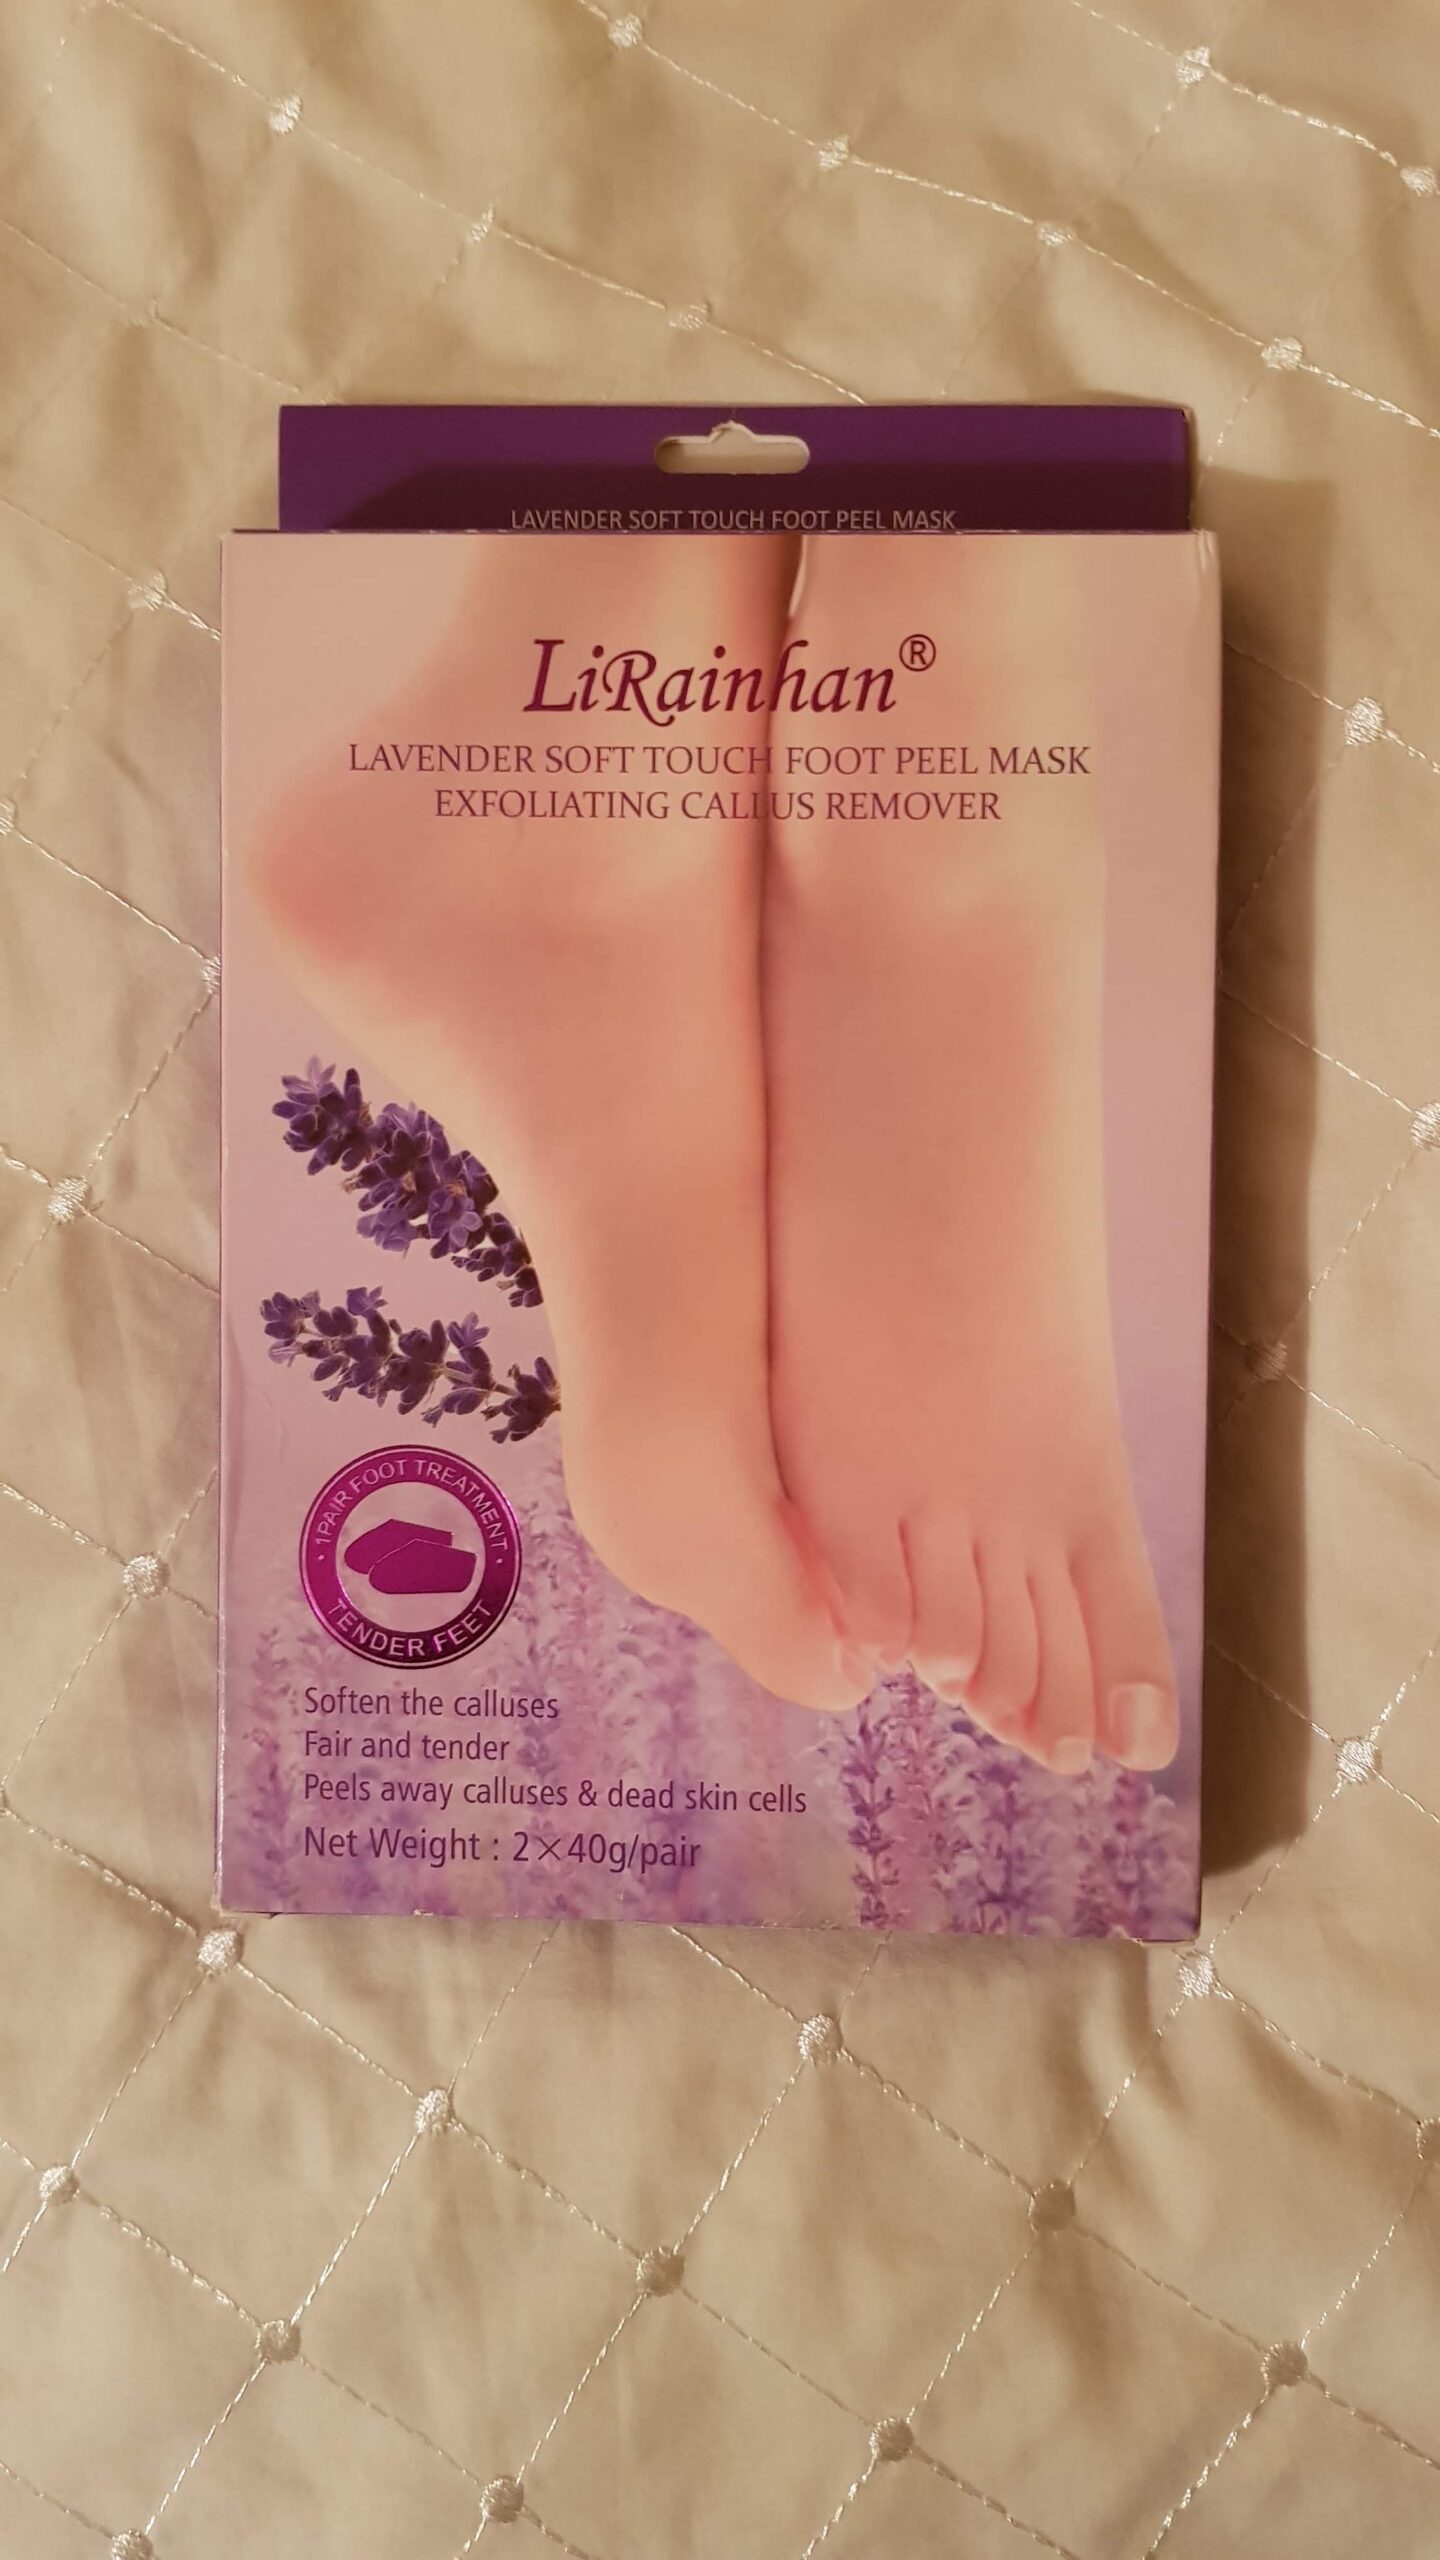 Product review – Foot Peel Mask